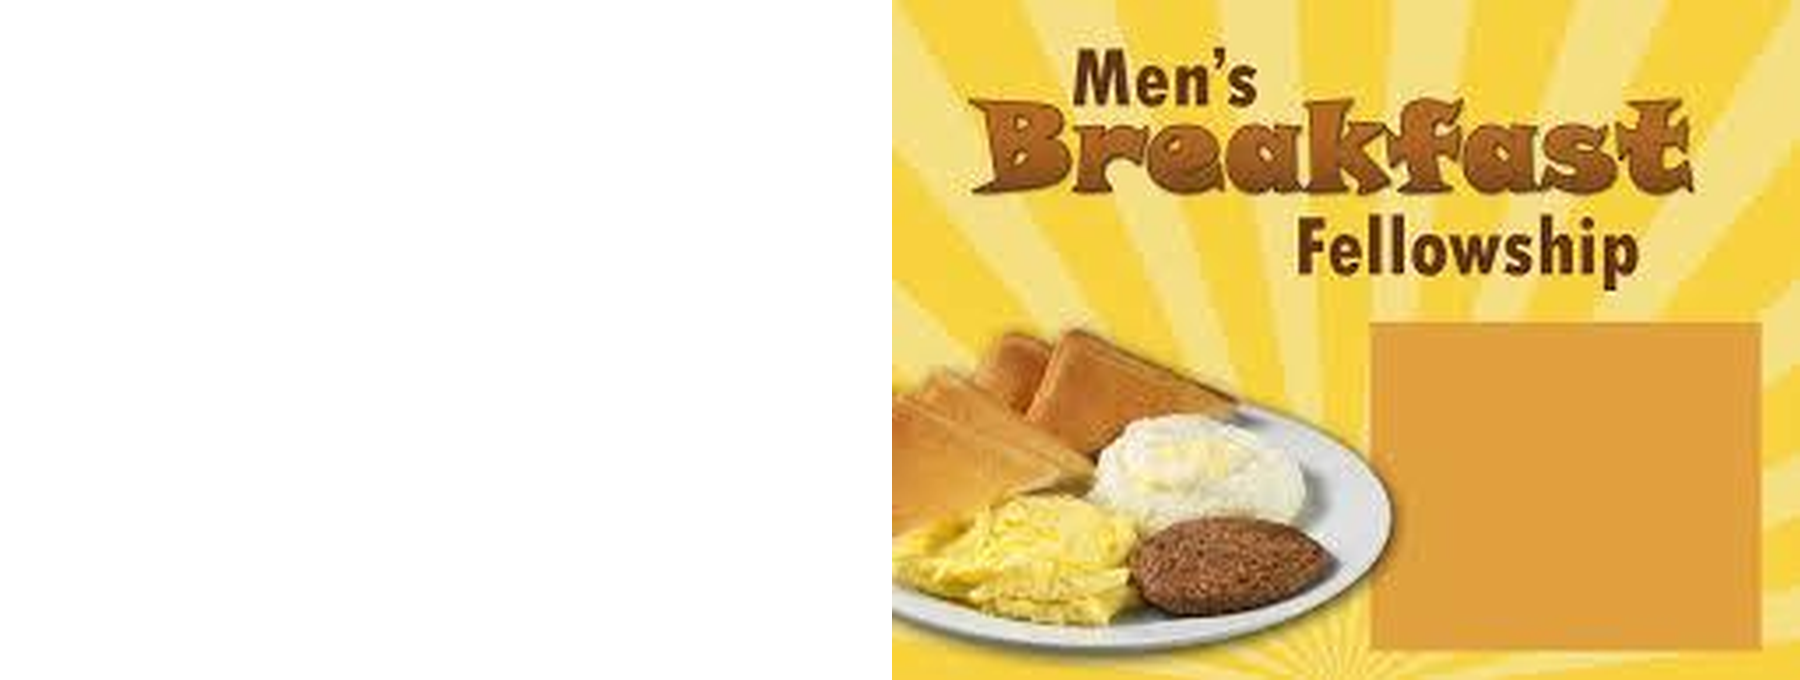 Next Men's Fellowship Breakfast: Saturday, June 3, 8:00 a.m. &nbsp; Invite a friend, bring your appetite and come to enjoy good food, fellowship and an interesting speaker. &nbsp;Admission: freewill offering. &nbsp; If you have any questions, please contact: Jack Page: &nbsp;Click for email address